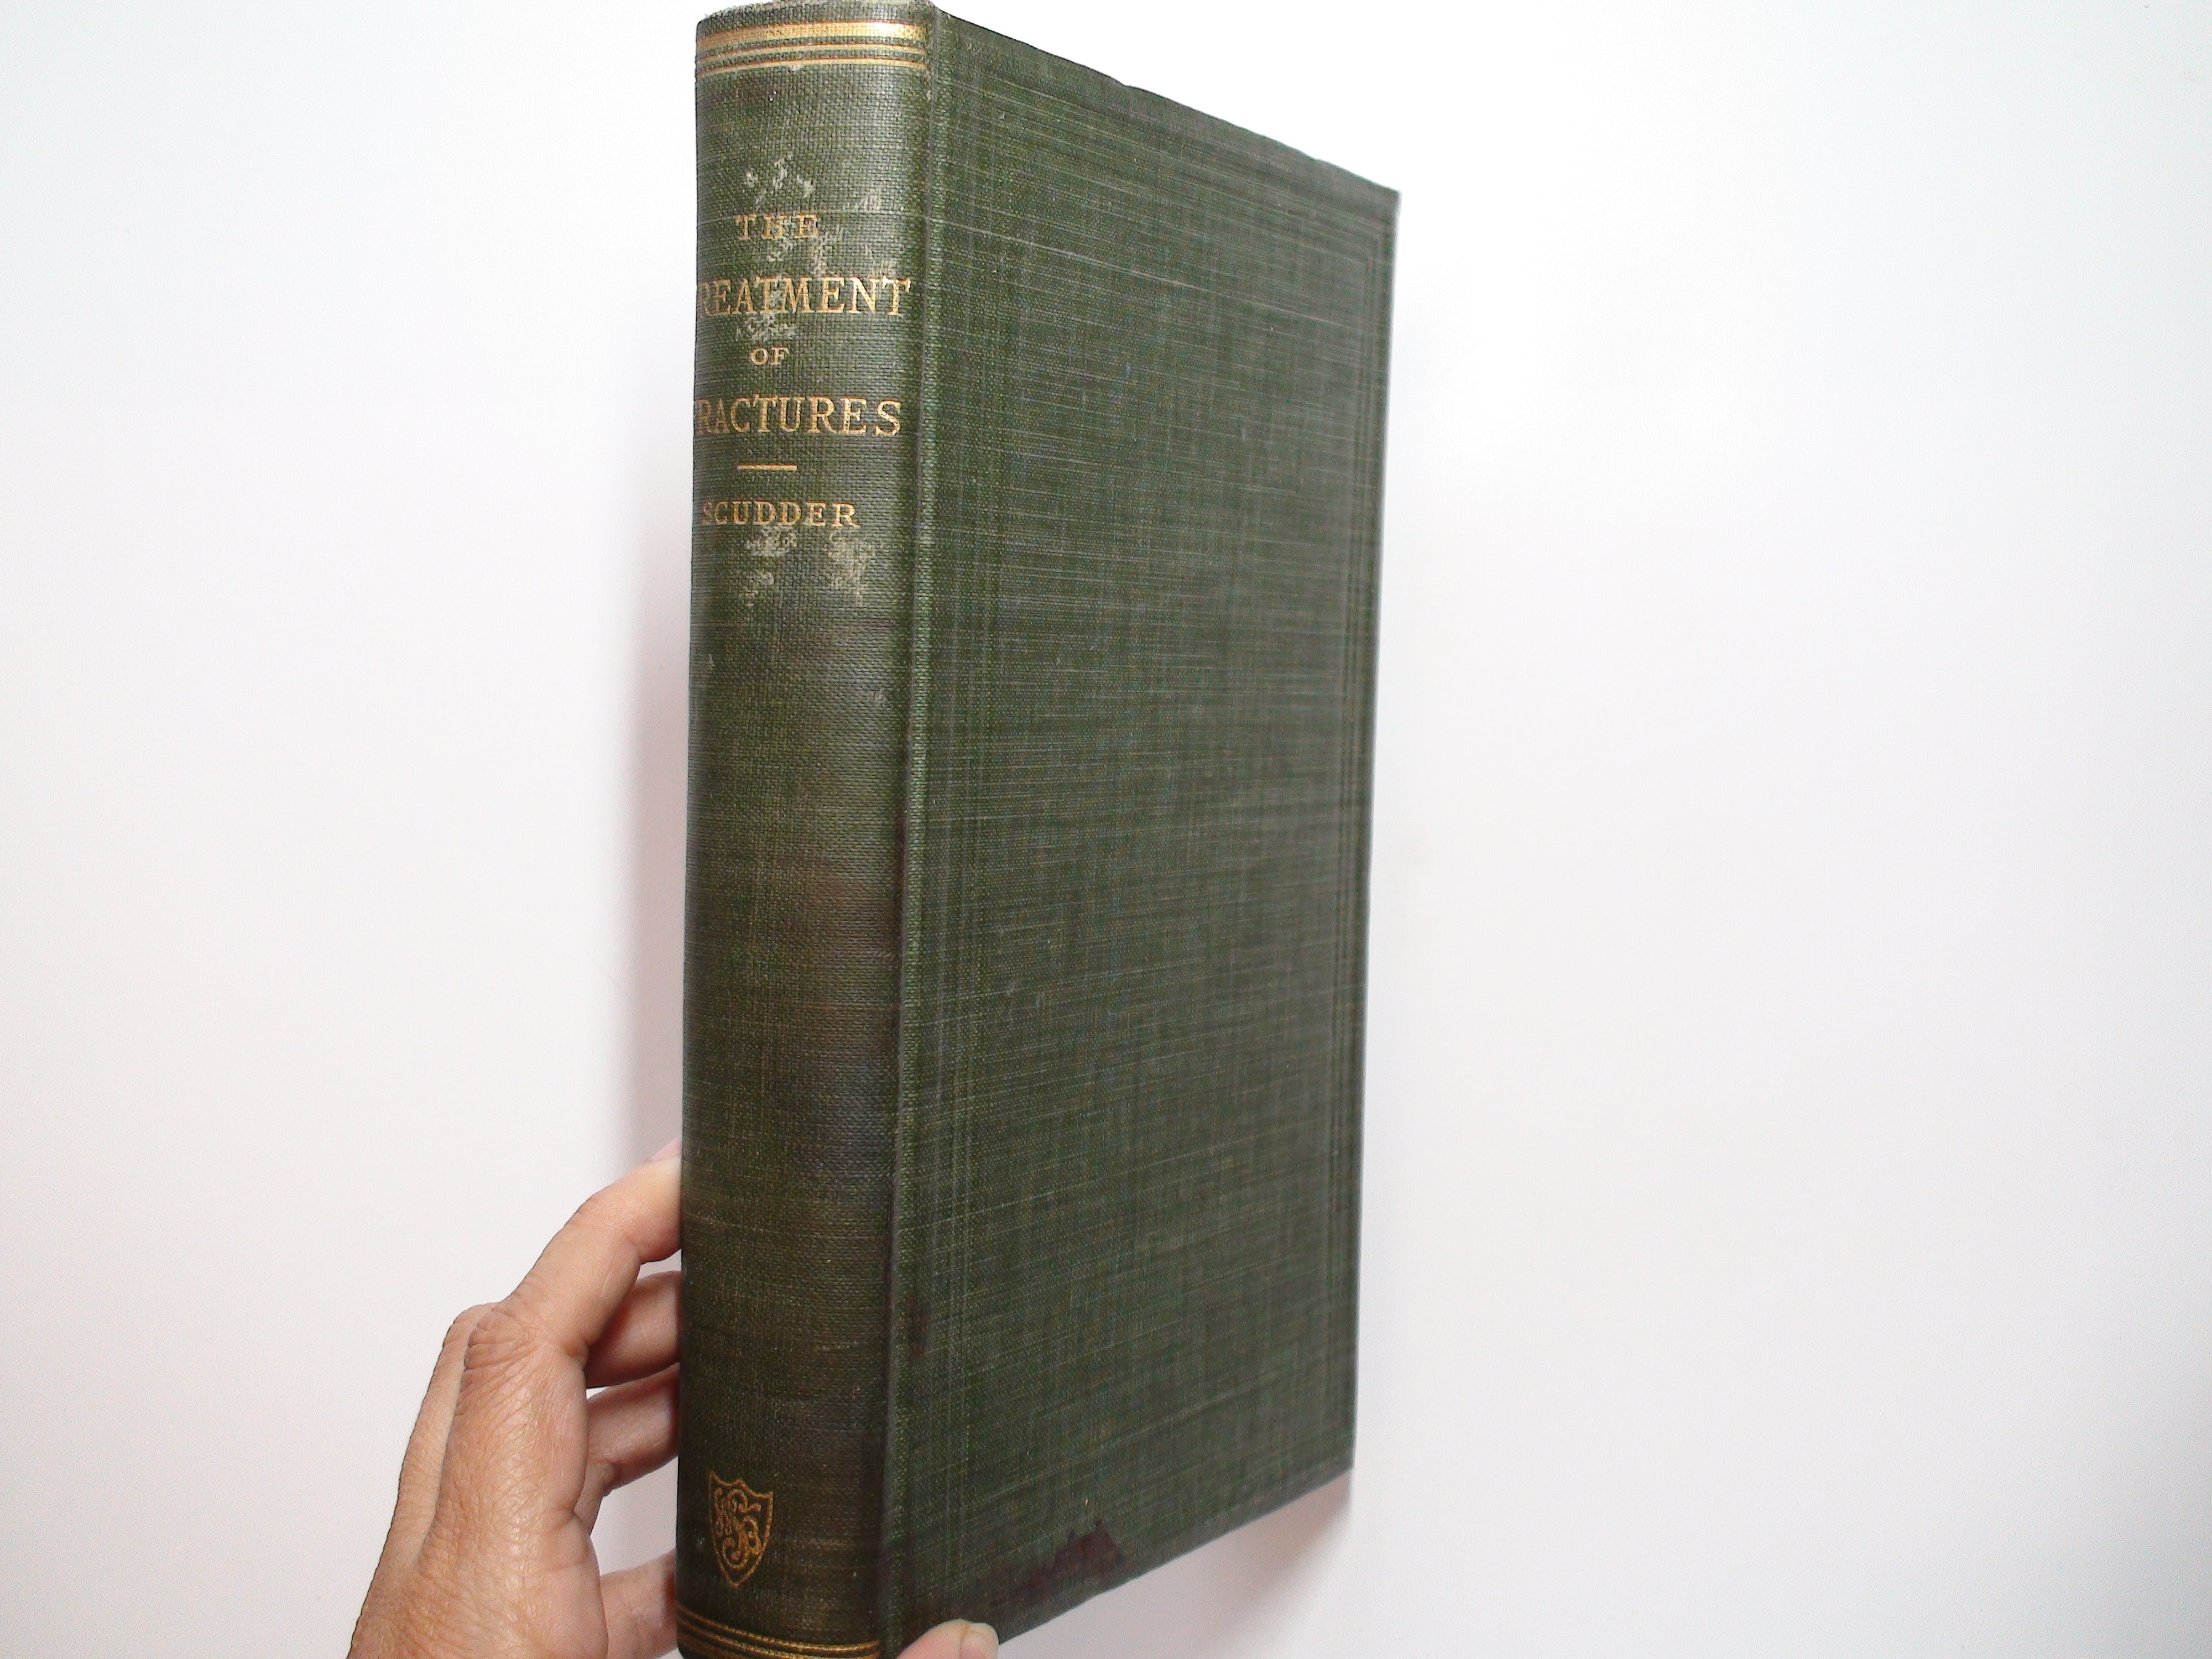 Treatment of Fractures, Charles Locke Scudder, Illustrated, 1st Ed, 1900